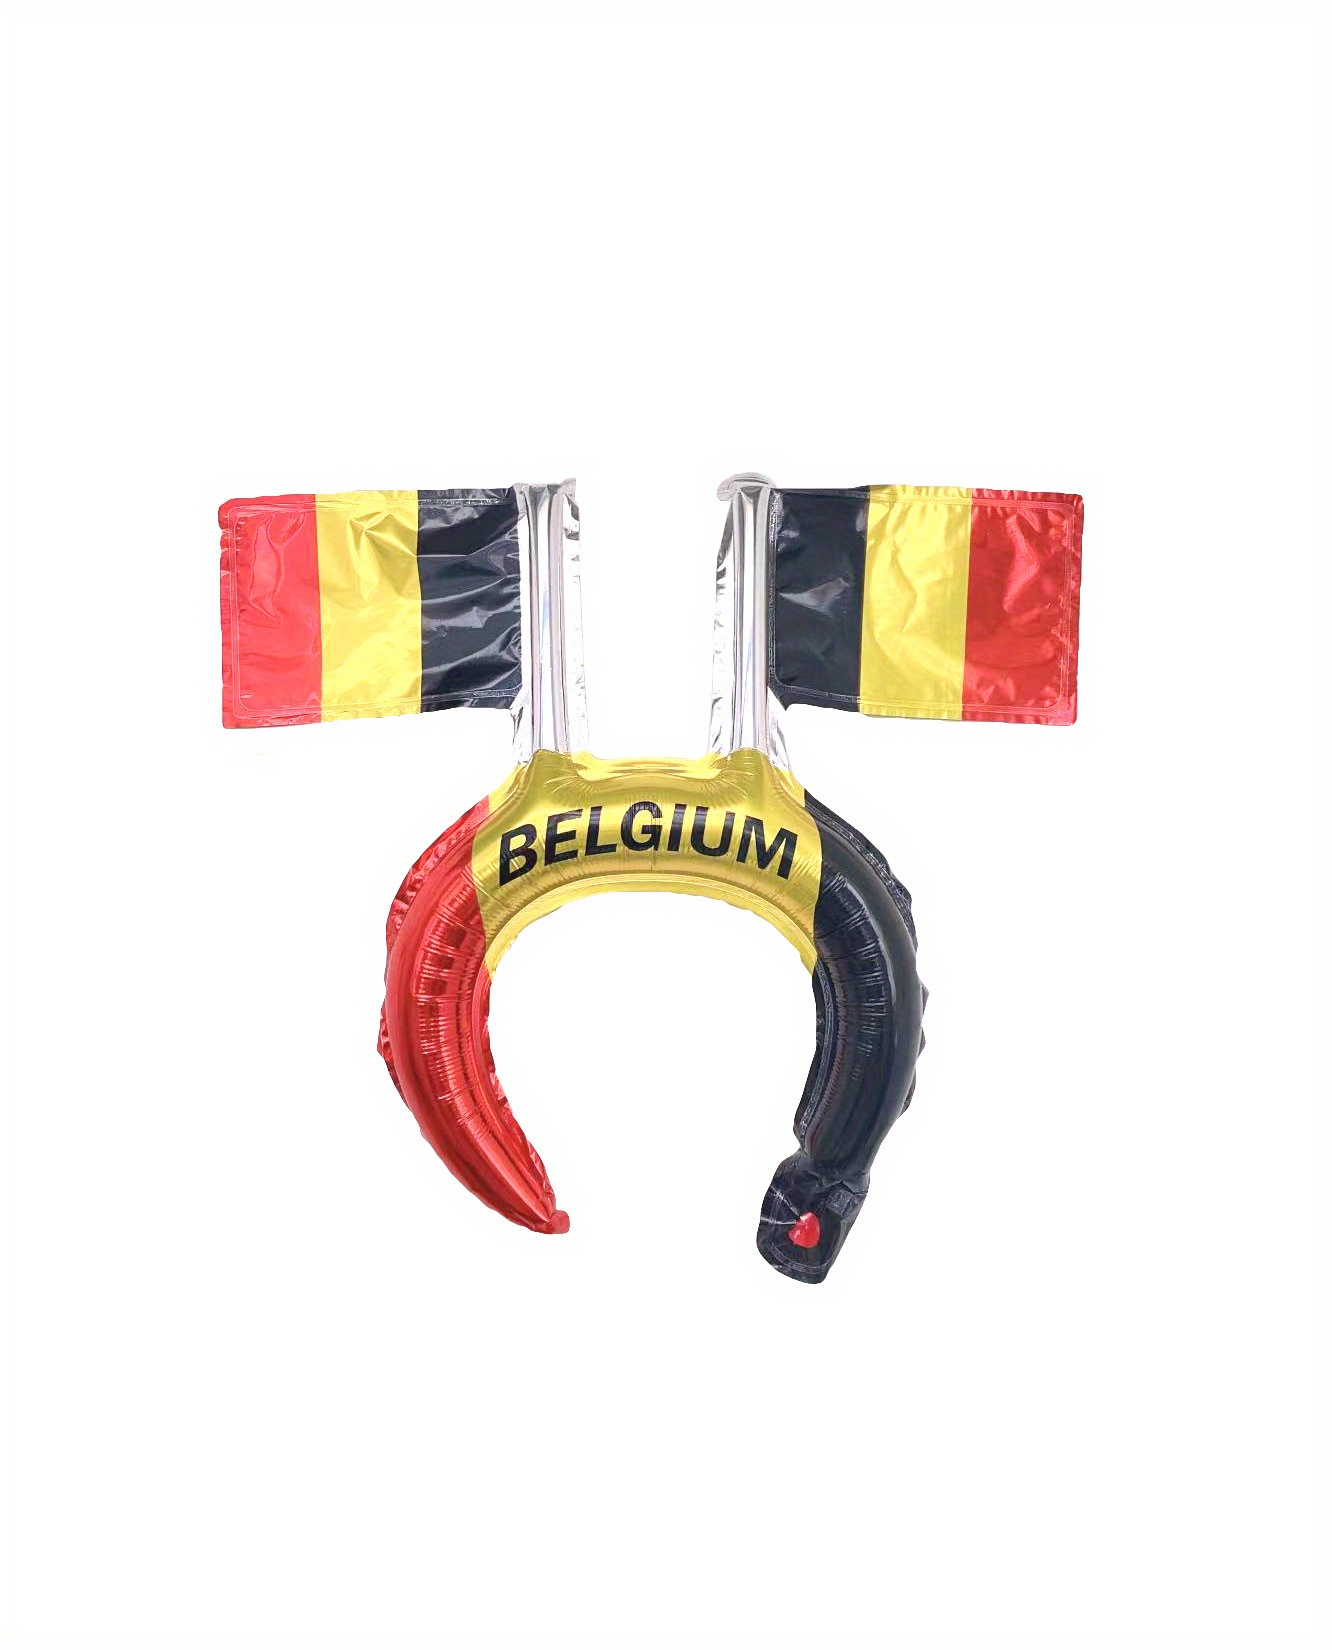 2024 supporter gear set of 2 inflatable headband balloons for fans no electricity event party headwear with   belgium england festive soccer cheer accessories details 1